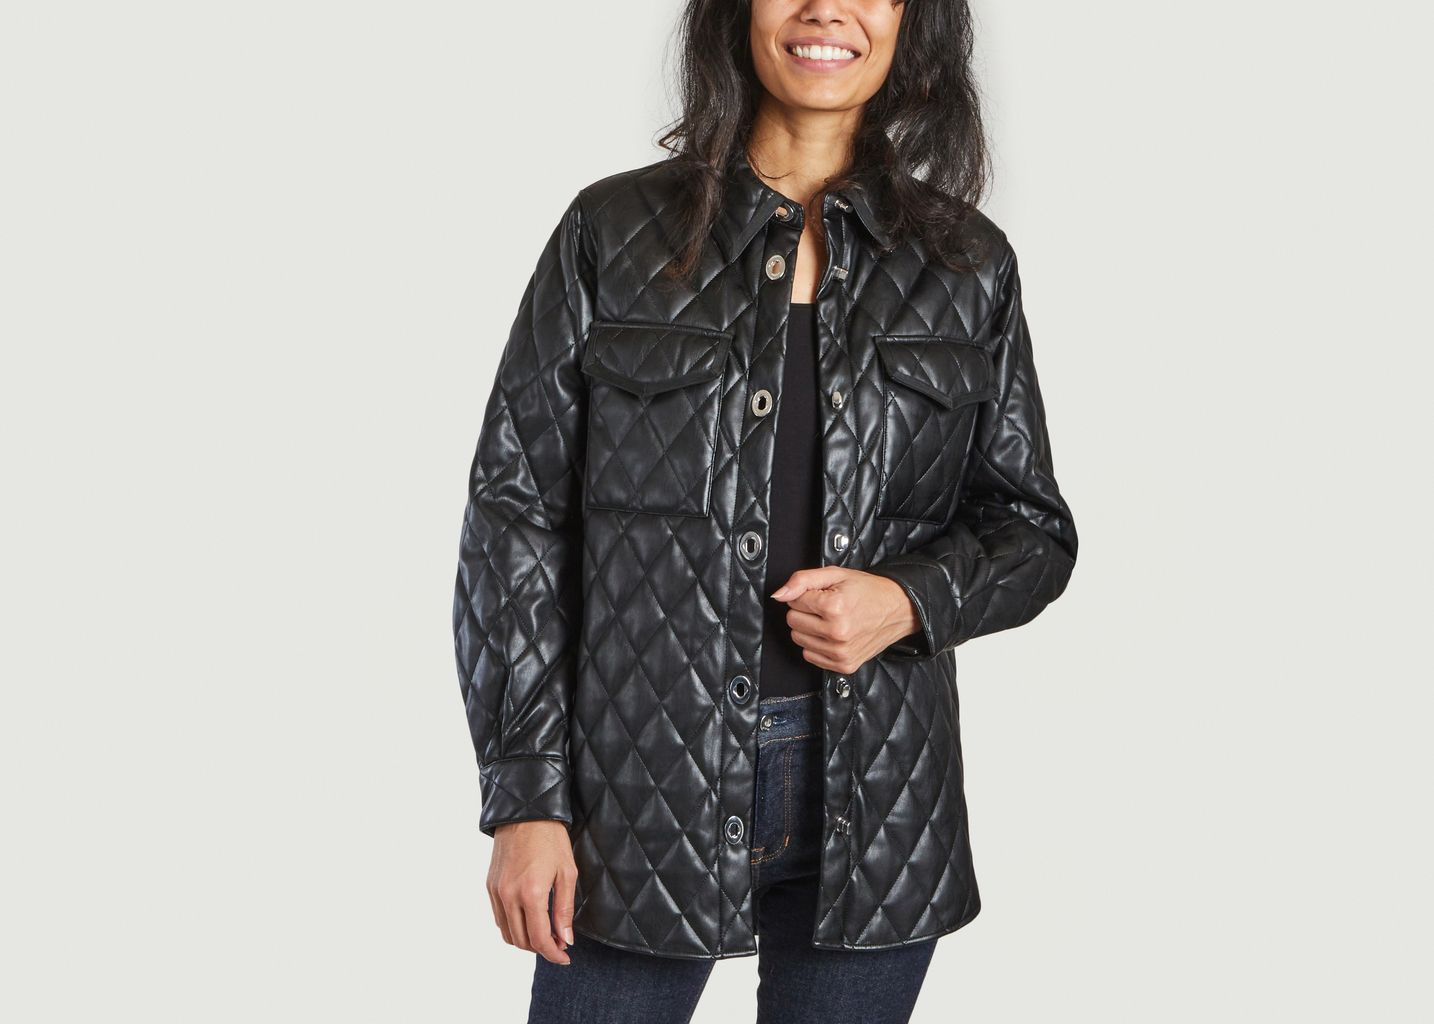 Womens Maje black Quilted Leather Jacket